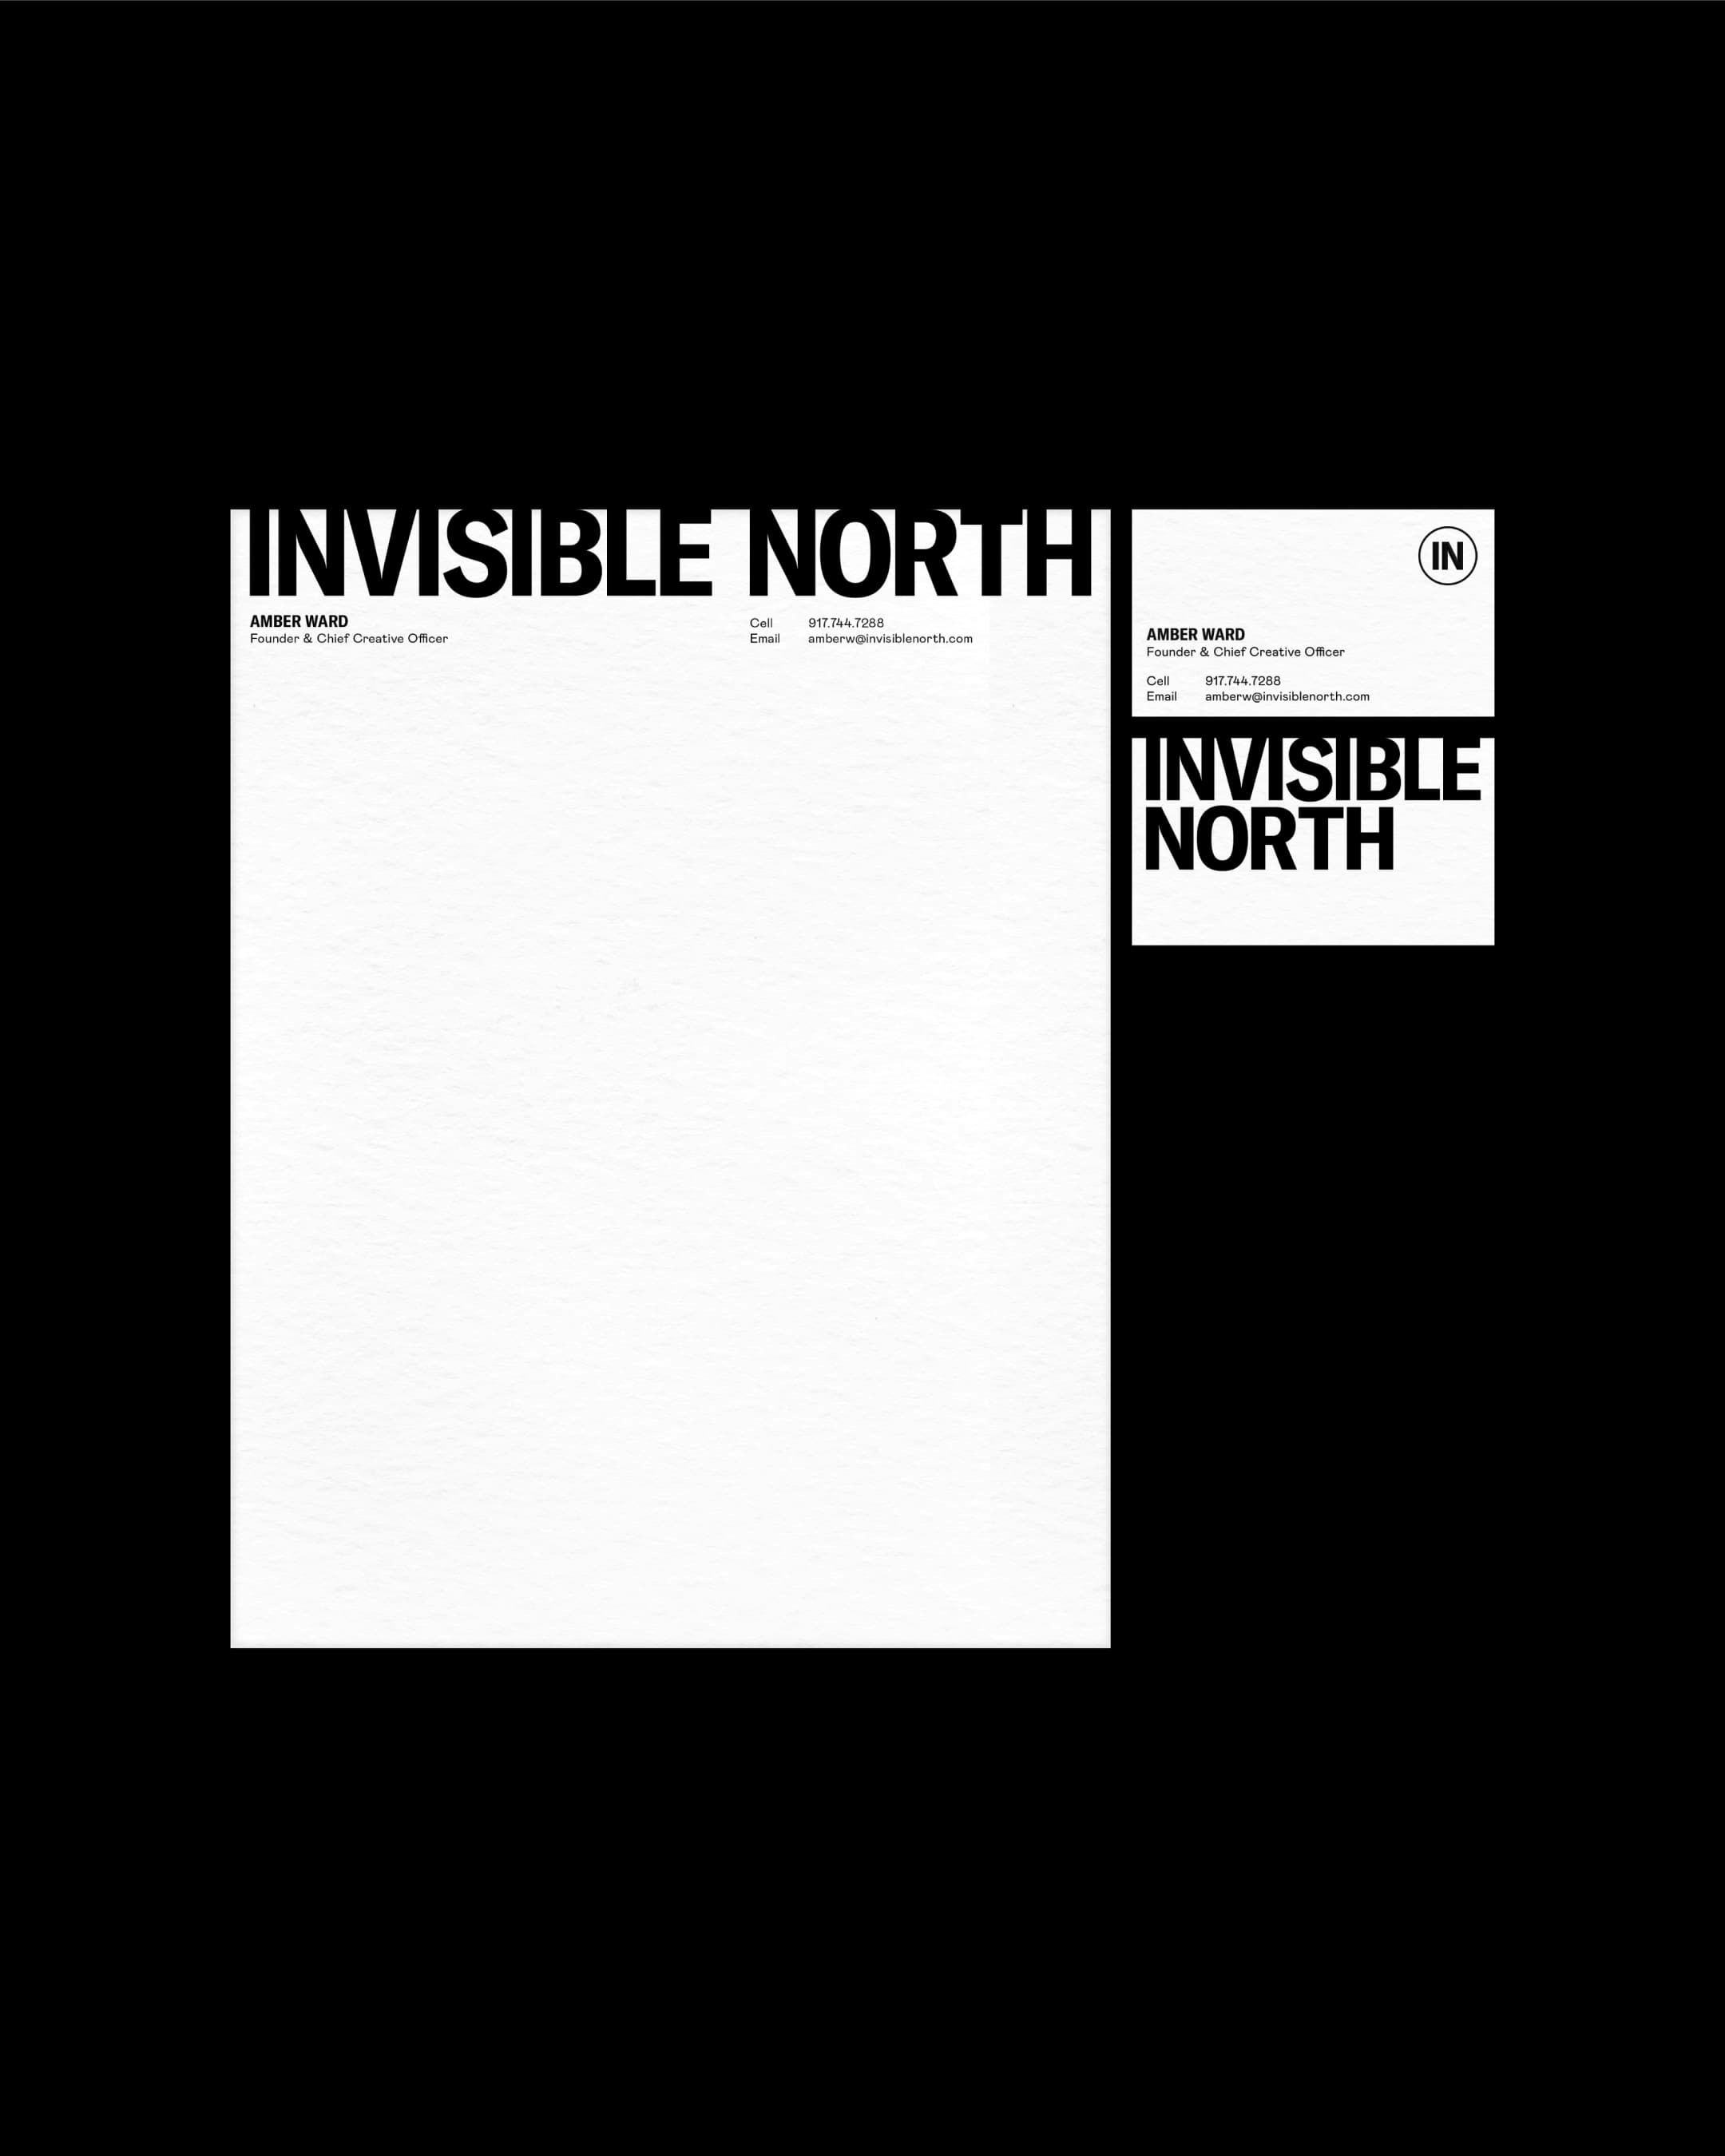 Invisible North brand identity, design and development by View Source